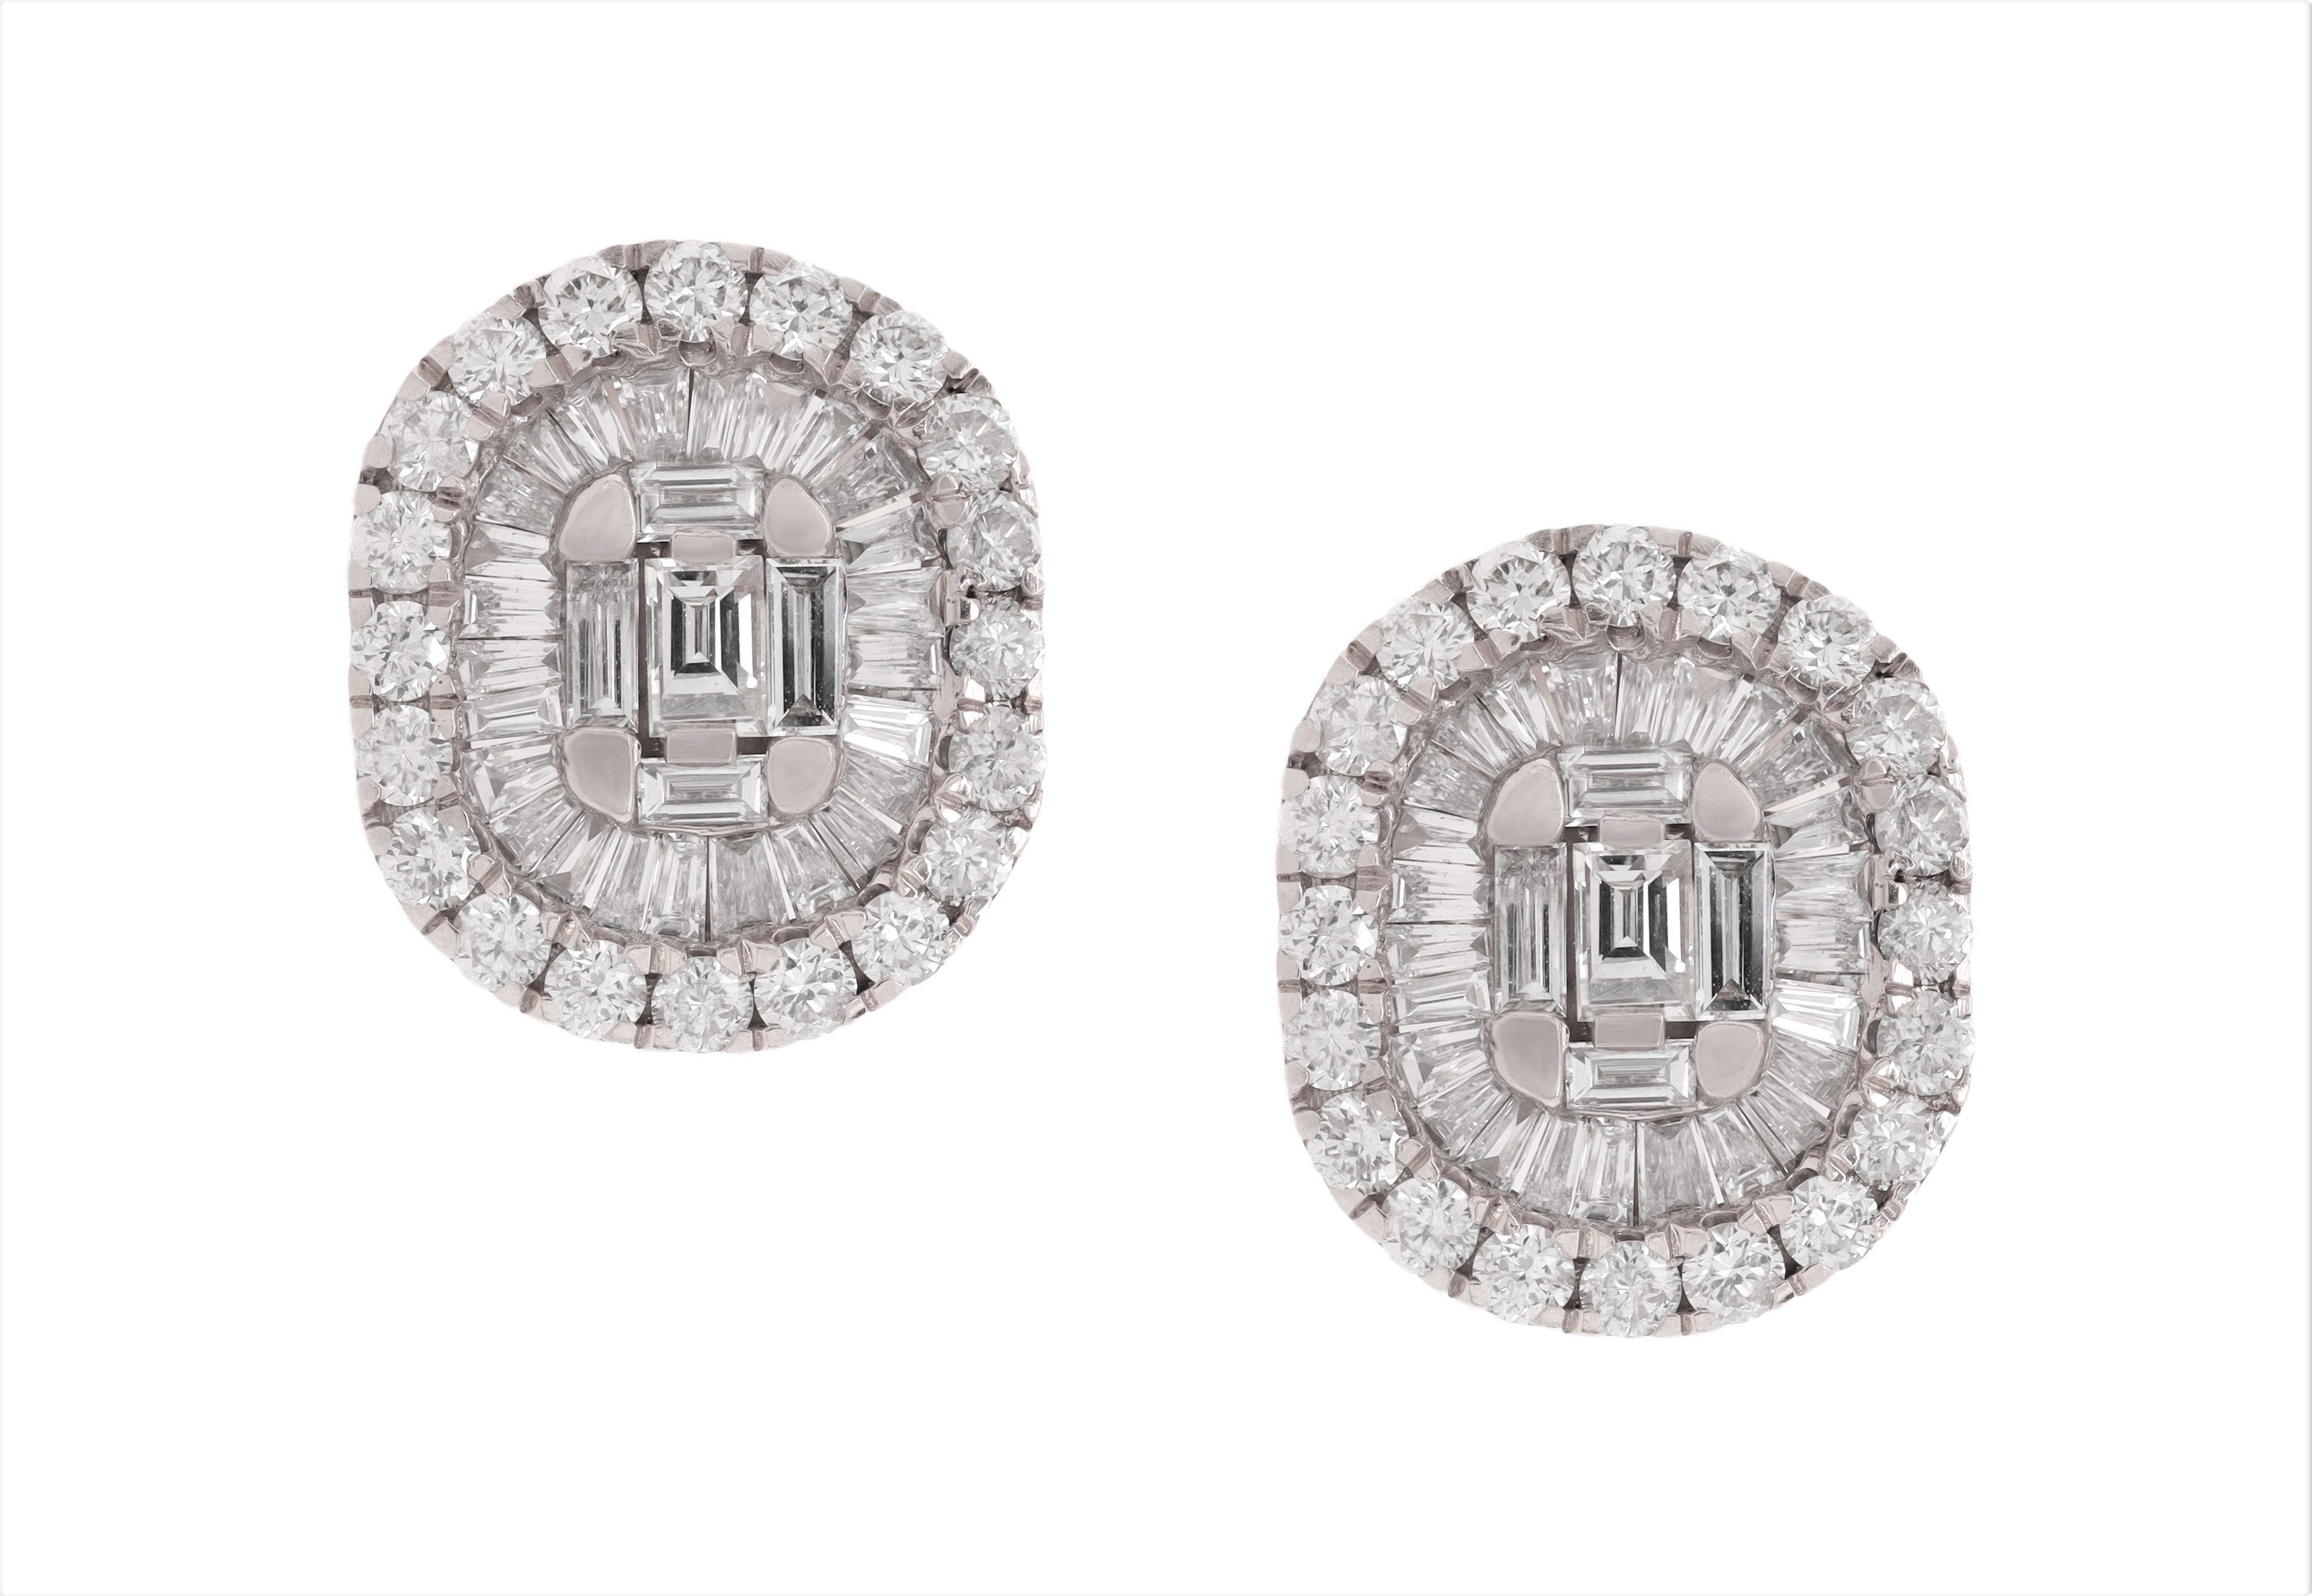 14K White Gold Diamond Earrings featuring 1.77 Carat T.W. of Natural Diamonds

Underline your look with this sharp 14K White Gold Diamond Earrings. High quality Diamonds. This Earrings will underline your exquisite look for any occasion.

. is a